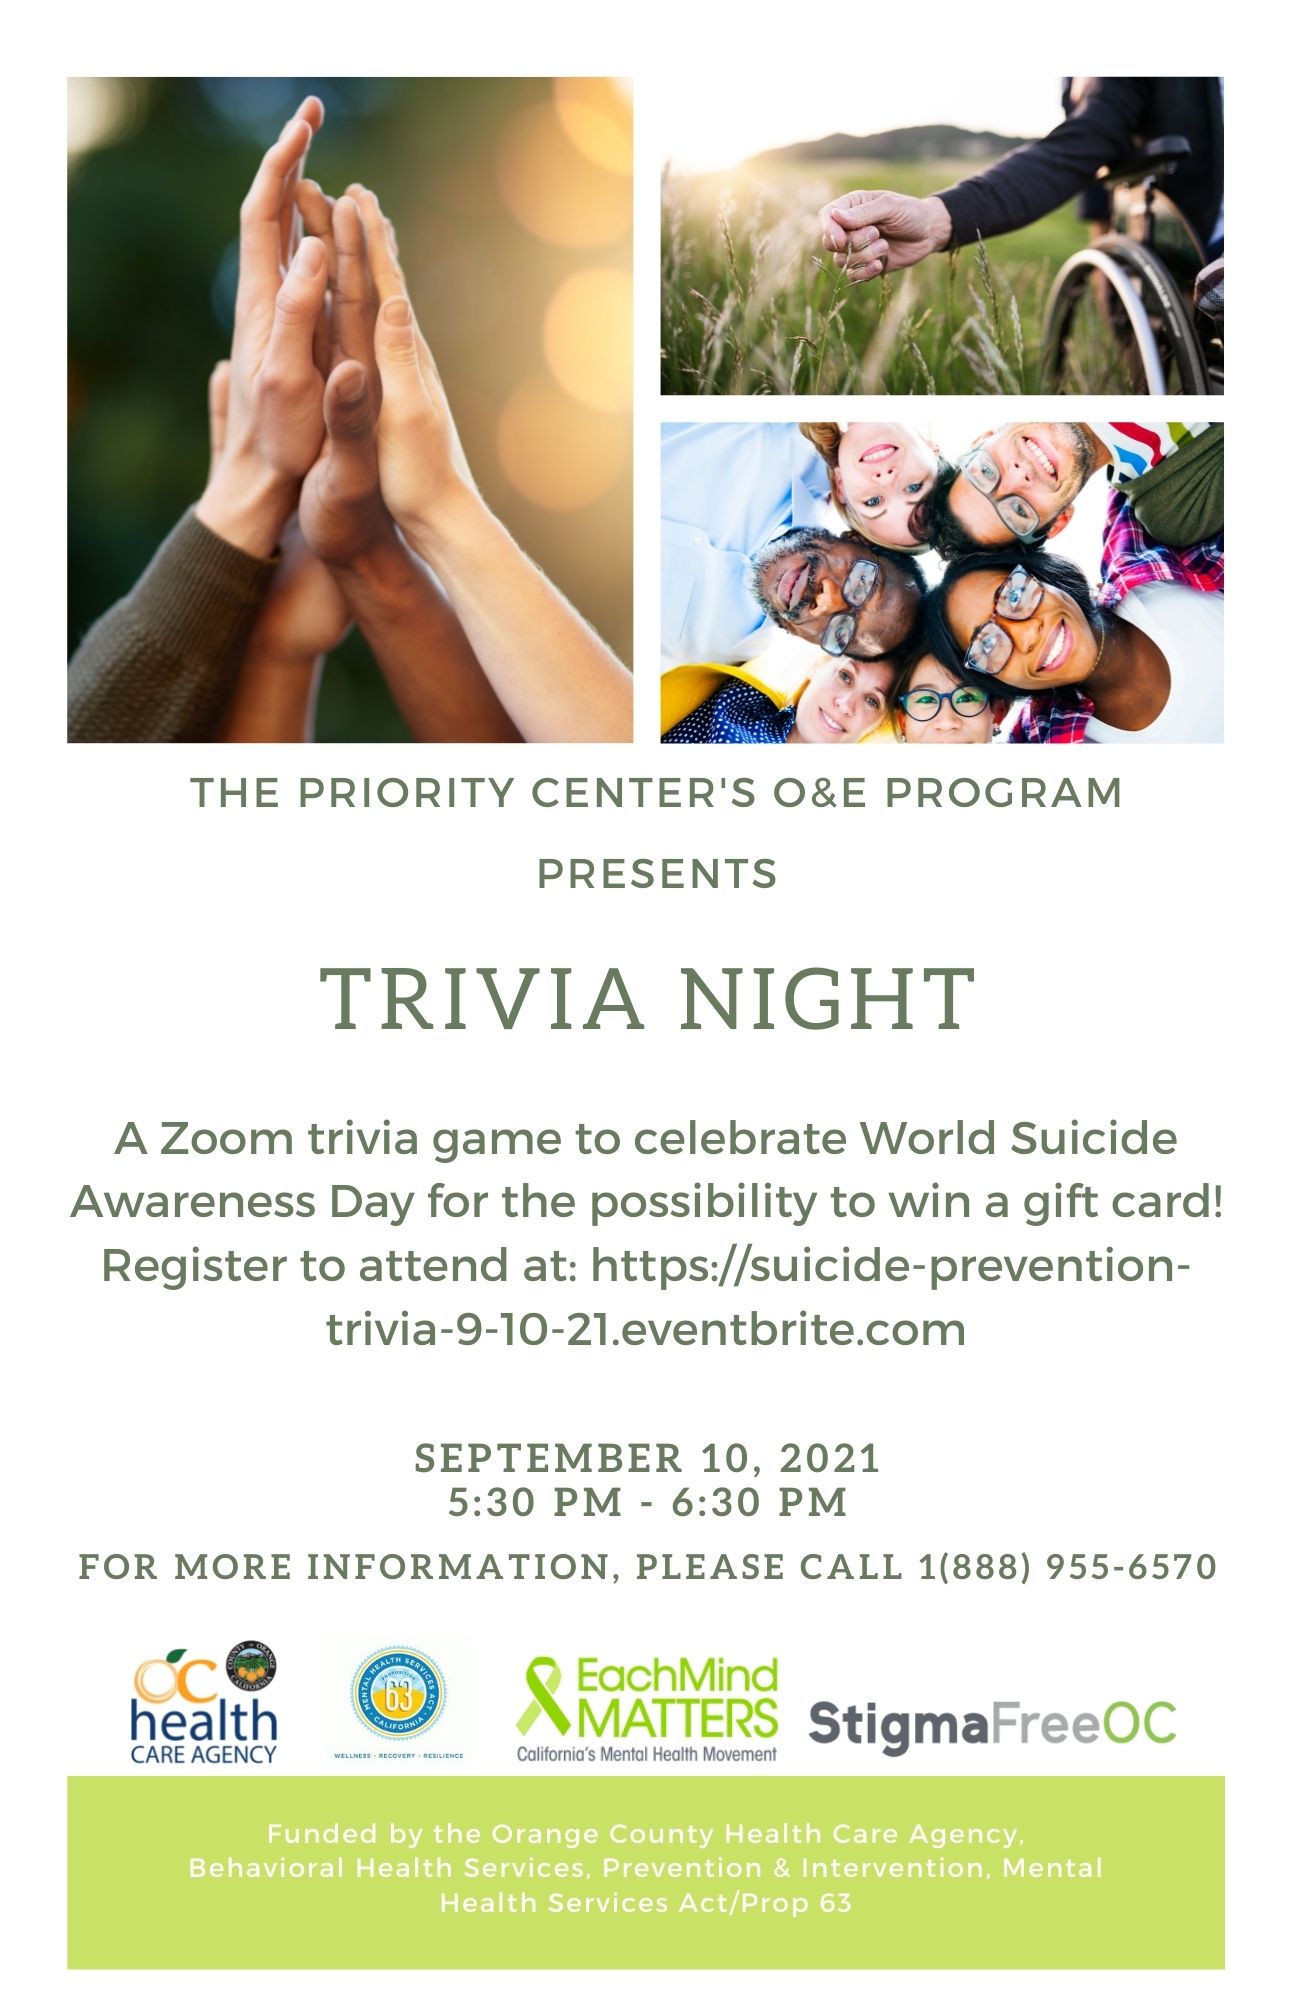 The Priority Center presents: Trivia Night to celebrate World Suicide Prevention Day!